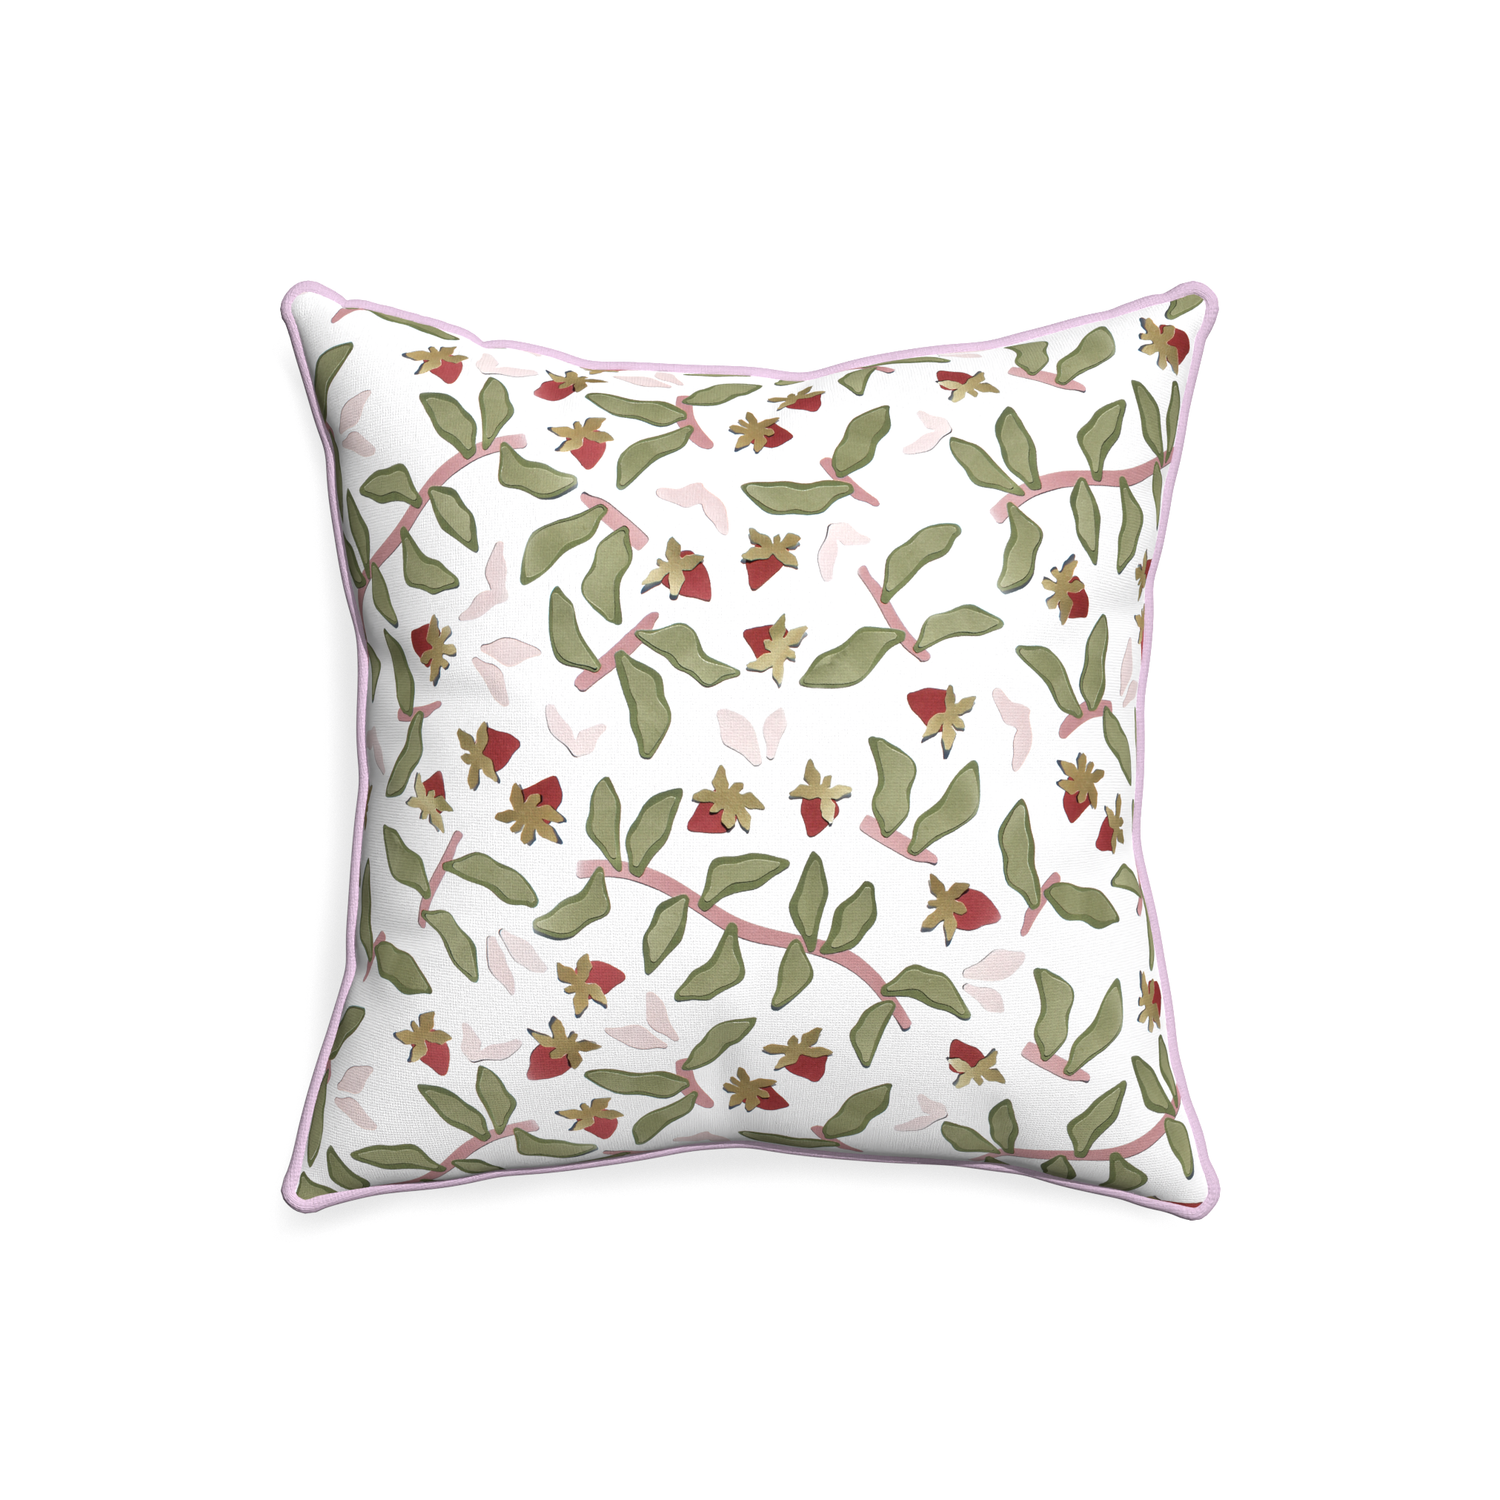 20-square nellie custom strawberry & botanicalpillow with l piping on white background